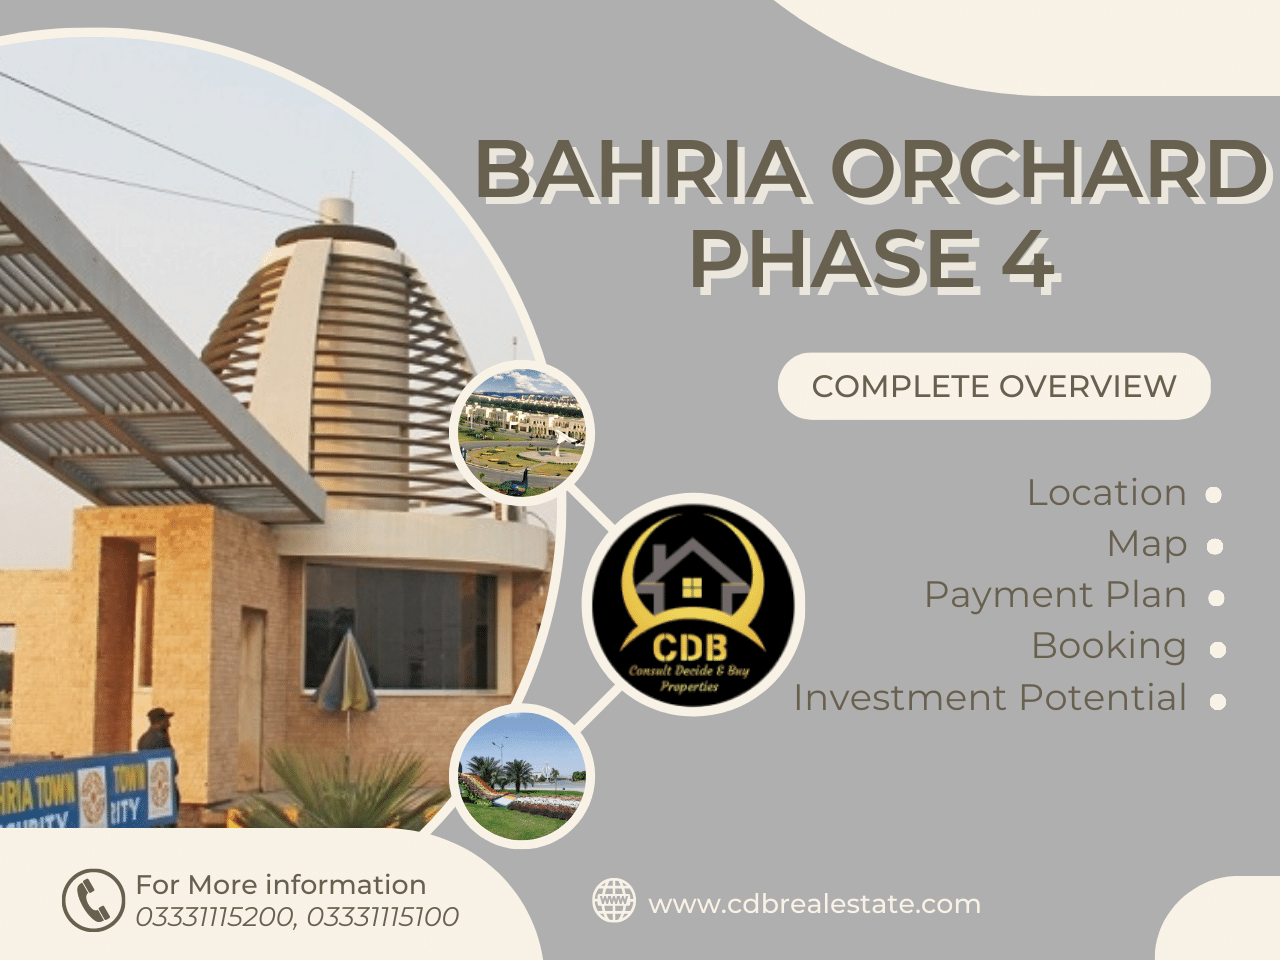 Bahria Orchard Phase 4